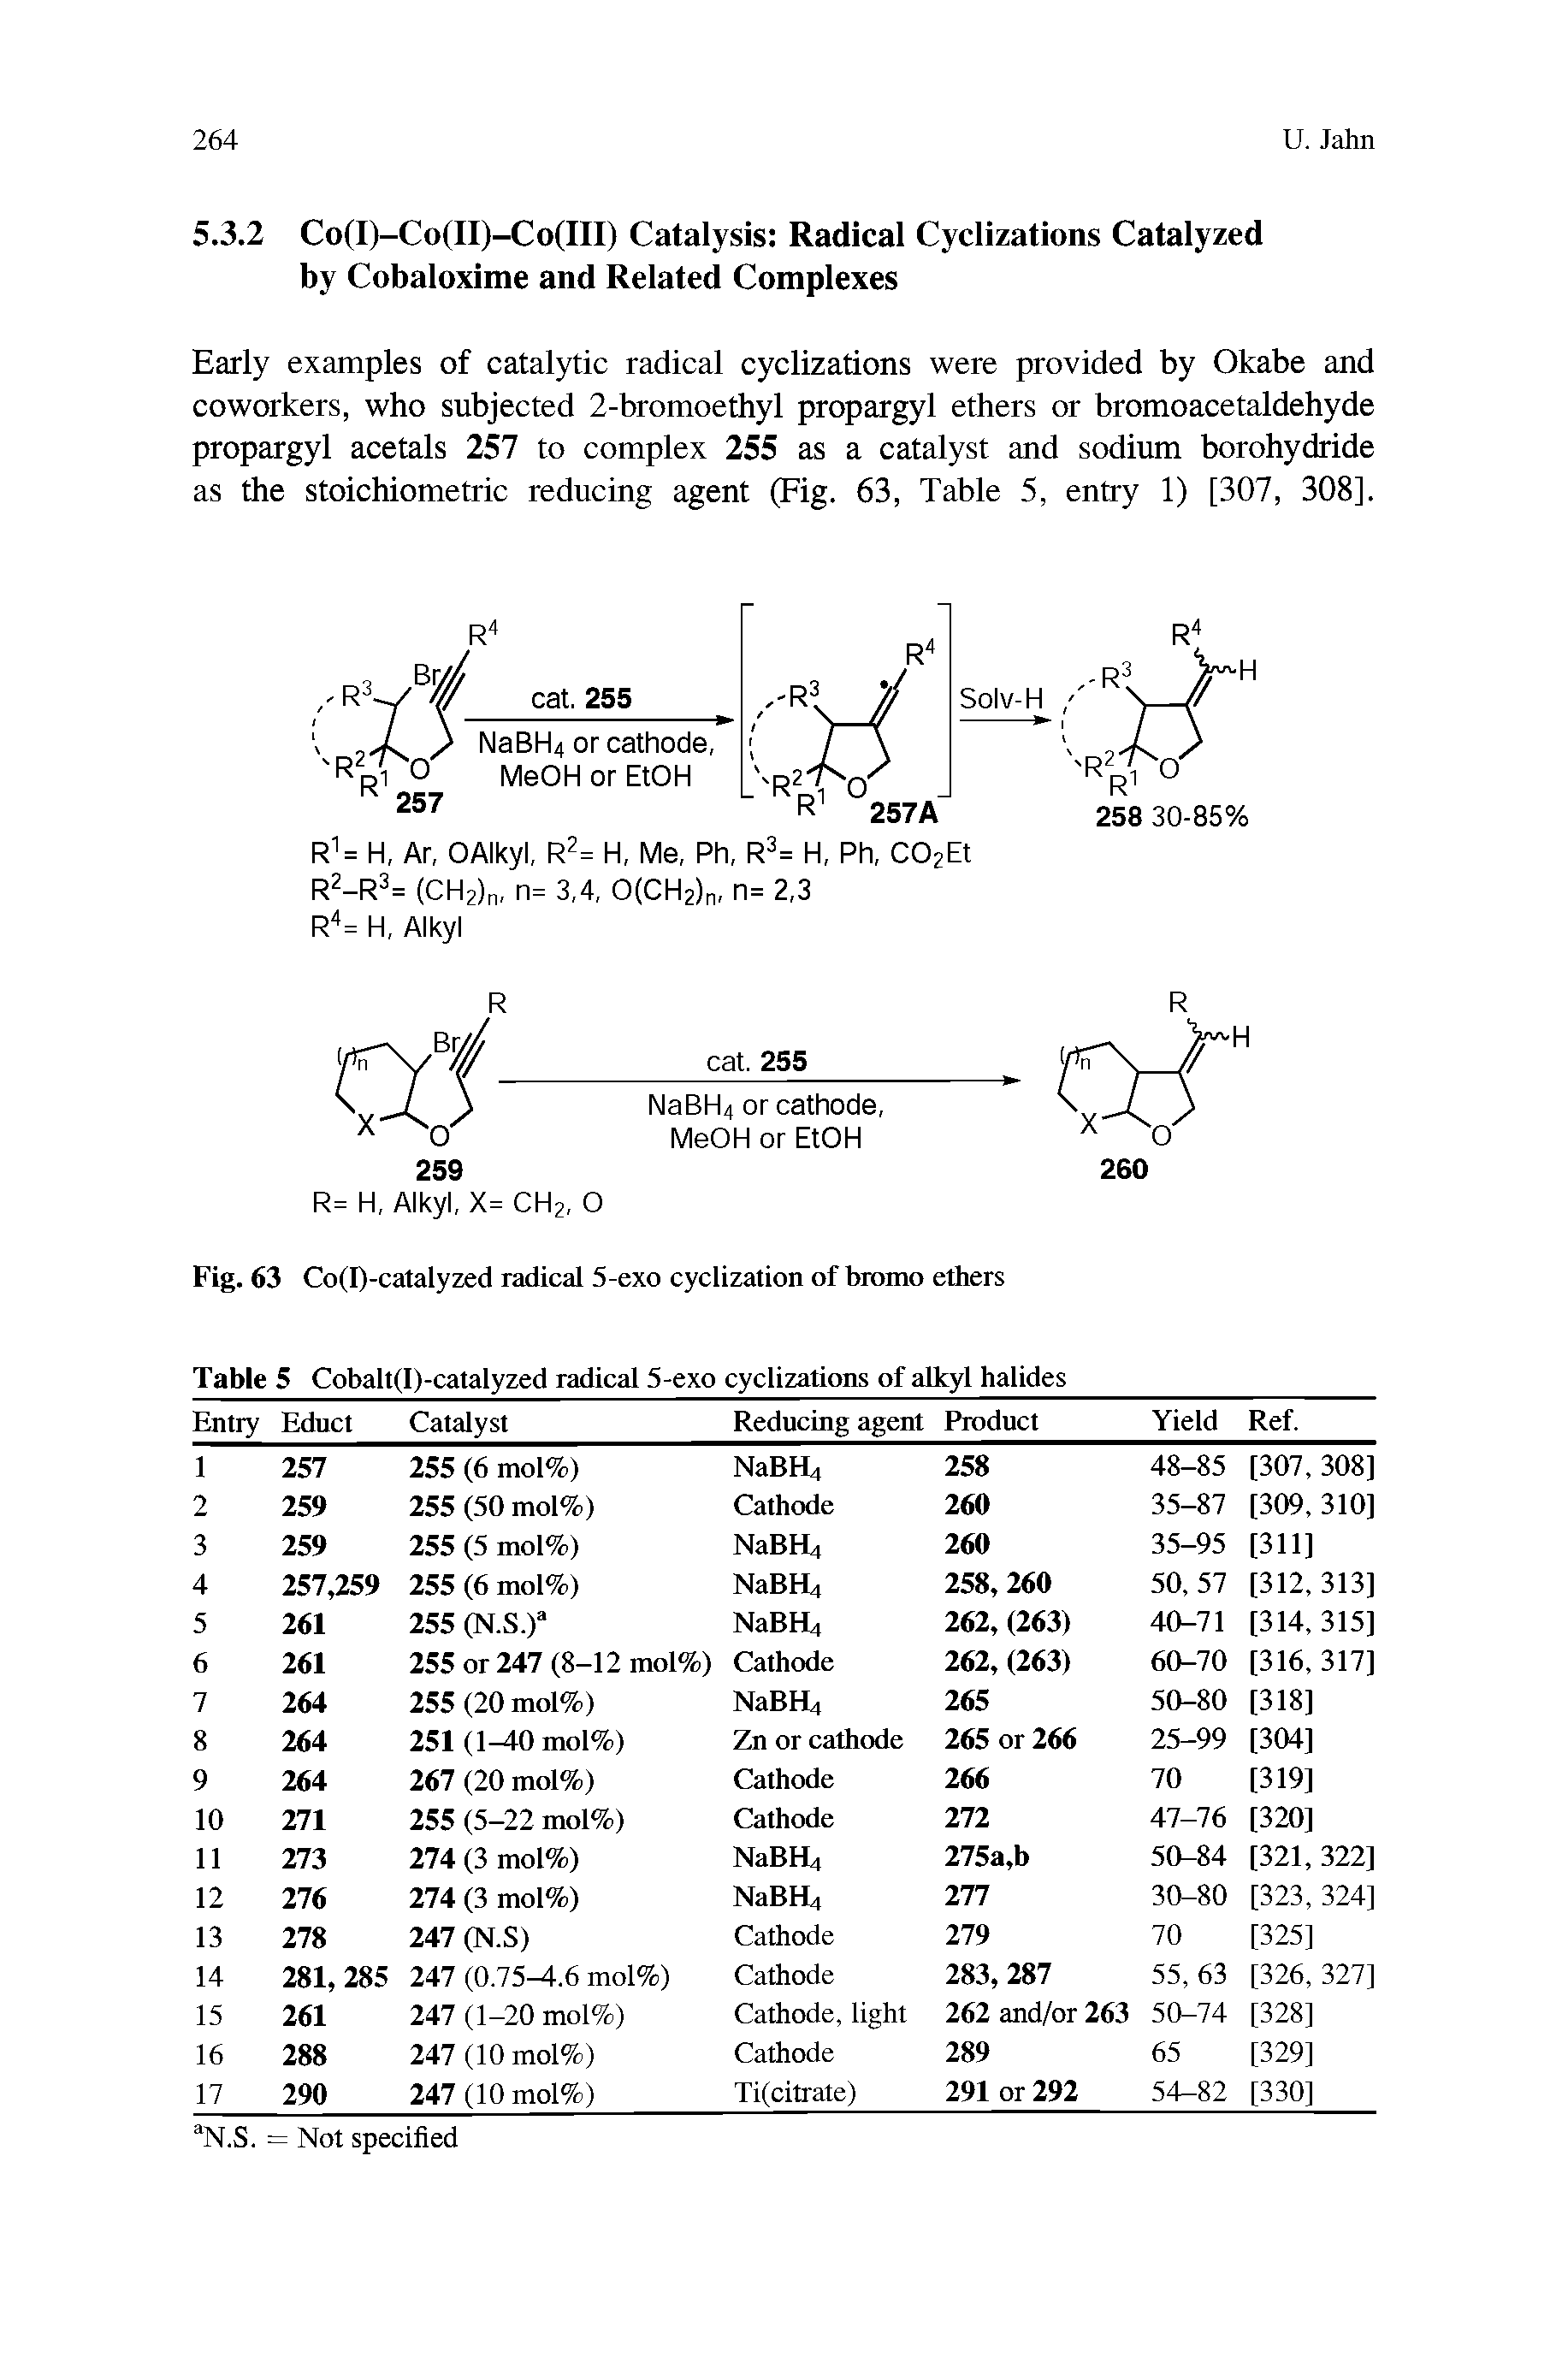 Table 5 Cobalt(I)-catalyzed radical 5-exo cyclizations of alkyl halides...